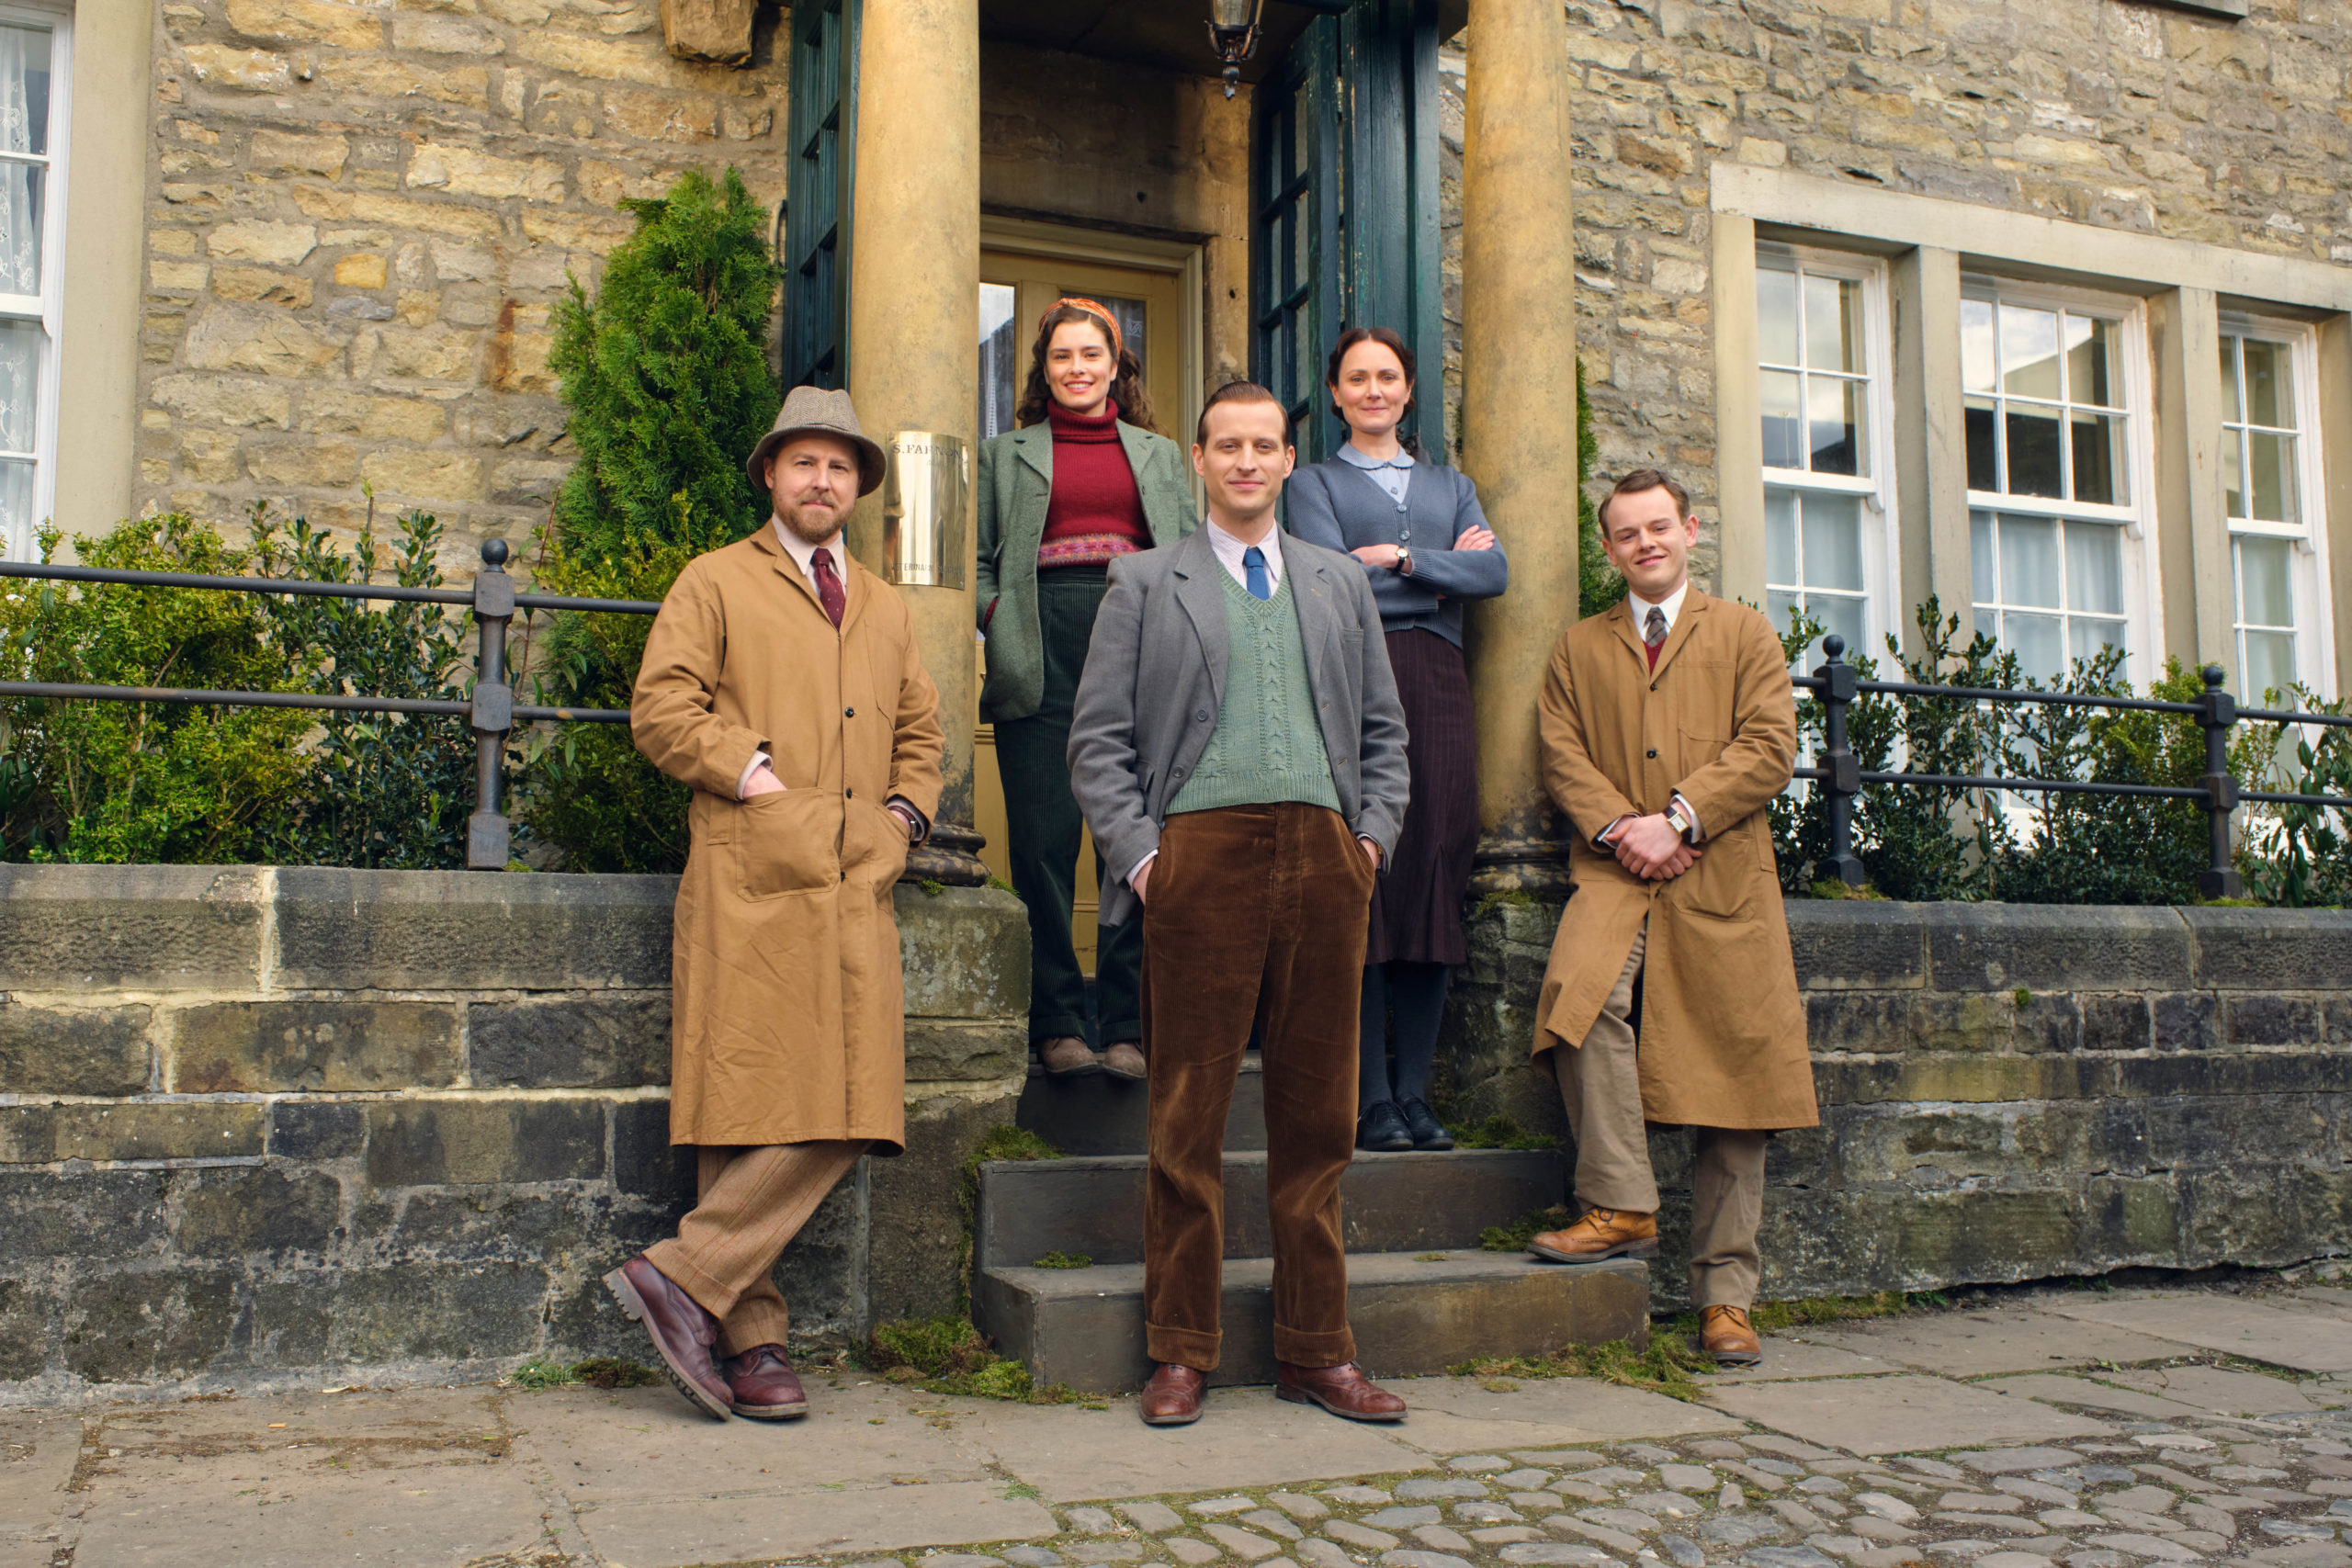 MASTERPIECE 
“All Creatures Great and Small” Season 2

Coming Soon to MASTERPIECE on PBS

Shown: FRONT LEFT TO RIGHT, SIEGFREID FARNON (SAMUEL WEST), JAMES HERRIOT (NICHOLAS RALPH) &amp; TRISTAN FARNON (CALLUM WOODHOUSE).
BACKROW: HELEN ALDERSON (RACHEL SHENTON) &amp; MRS HALL (ANNA MADELEY).

For editorial use only.

Courtesy of MASTERPIECE.